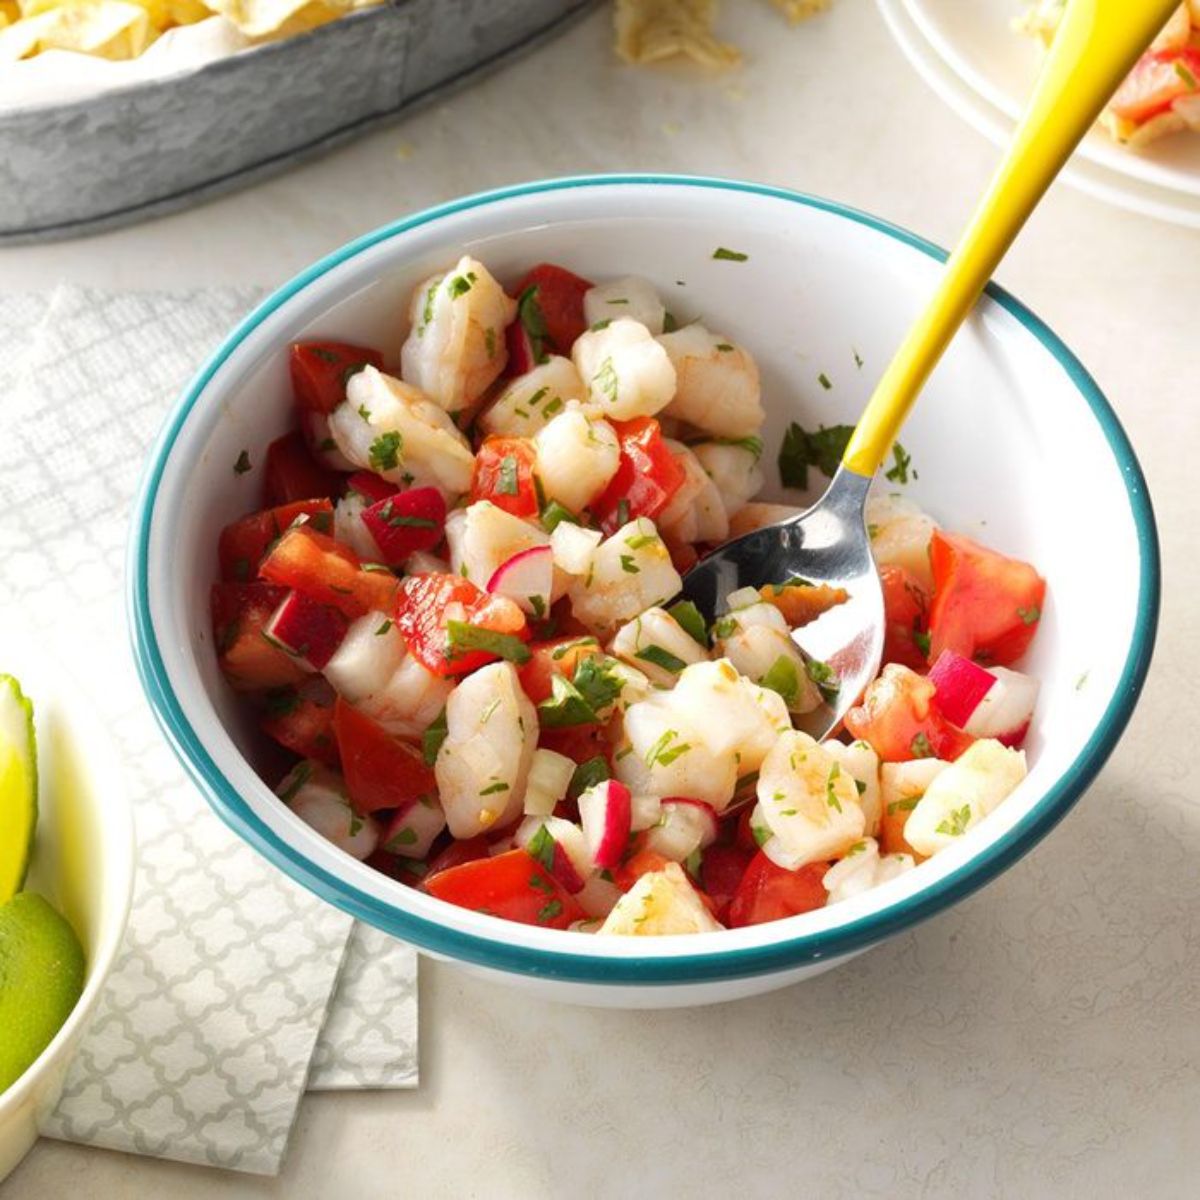 Spicy Shrimp Salsa in a white-blue bowl with a spoon.